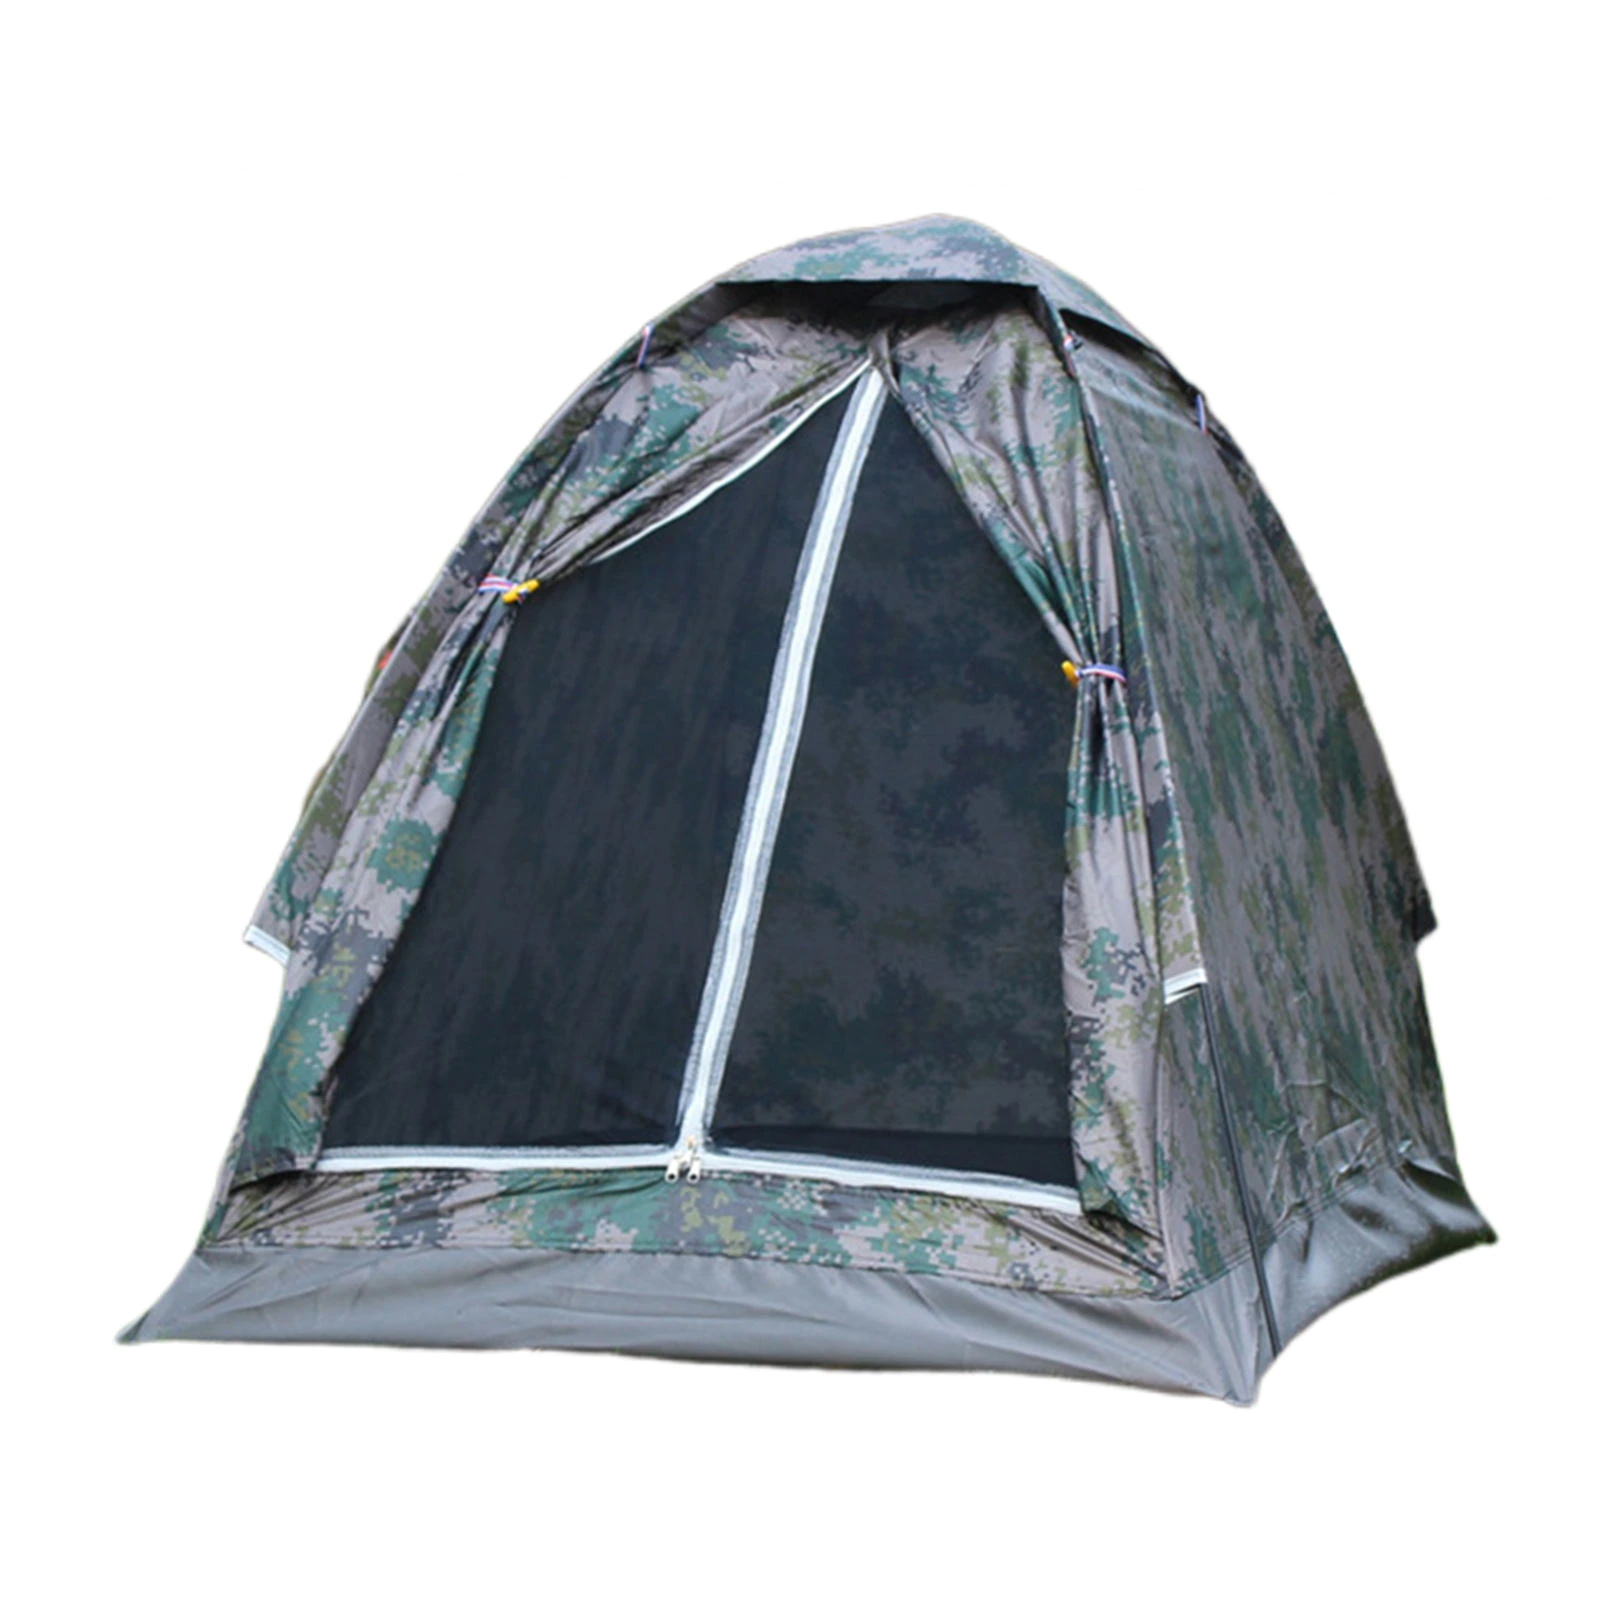 Cheap Goat Tents Tent Camouflage Patterns Camping Tent Backpacking Tent for Camping Hiking Tents